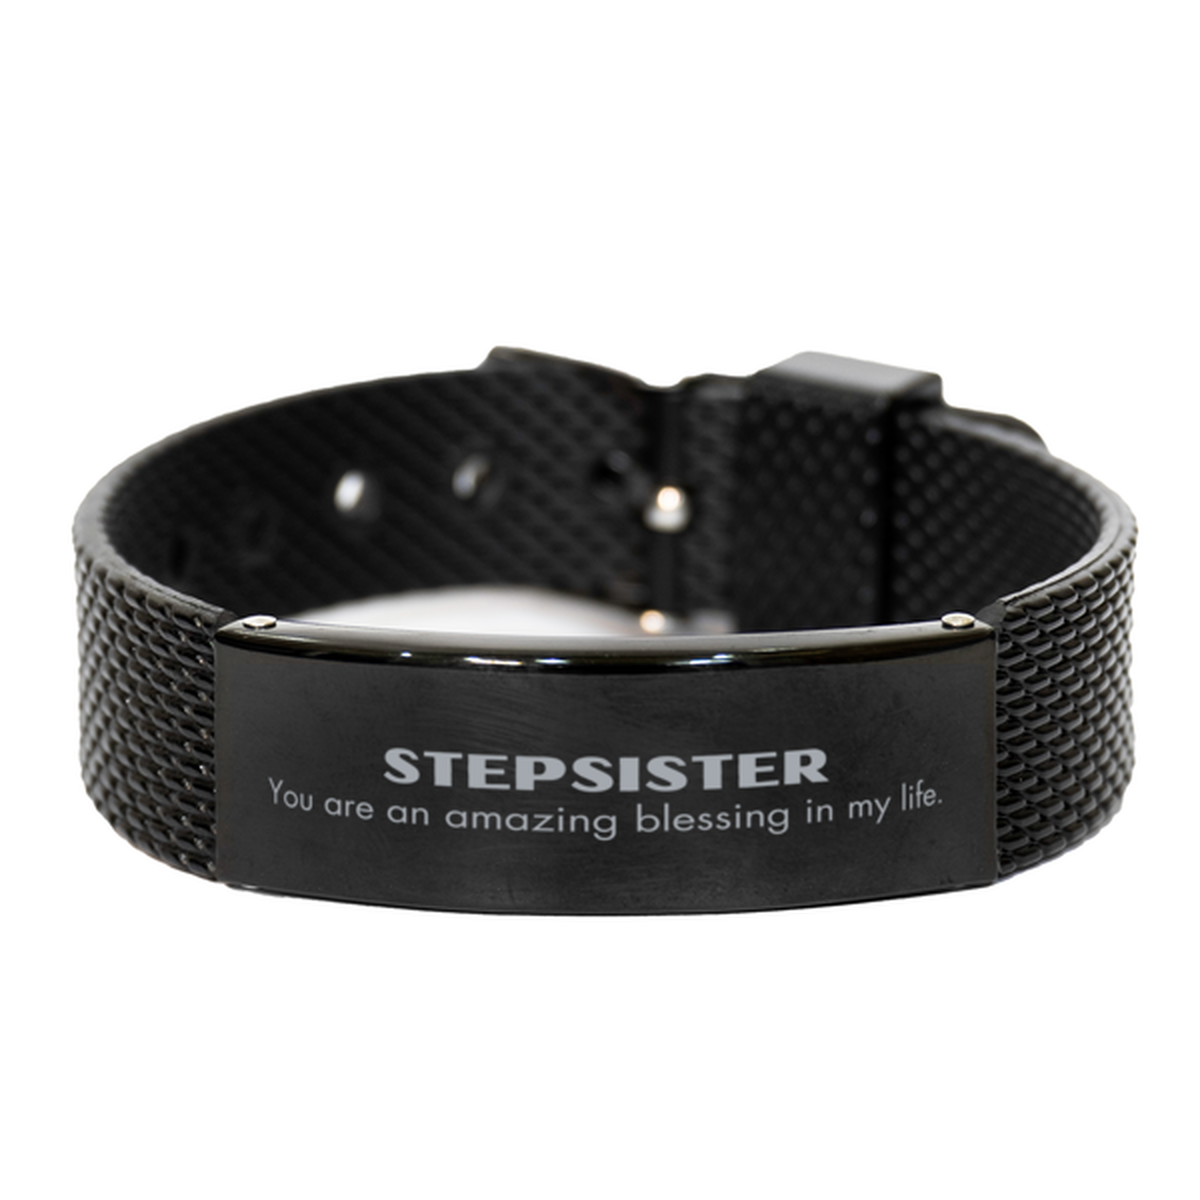 Stepsister Black Shark Mesh Bracelet, You are an amazing blessing in my life, Thank You Gifts For Stepsister, Inspirational Birthday Christmas Unique Gifts For Stepsister